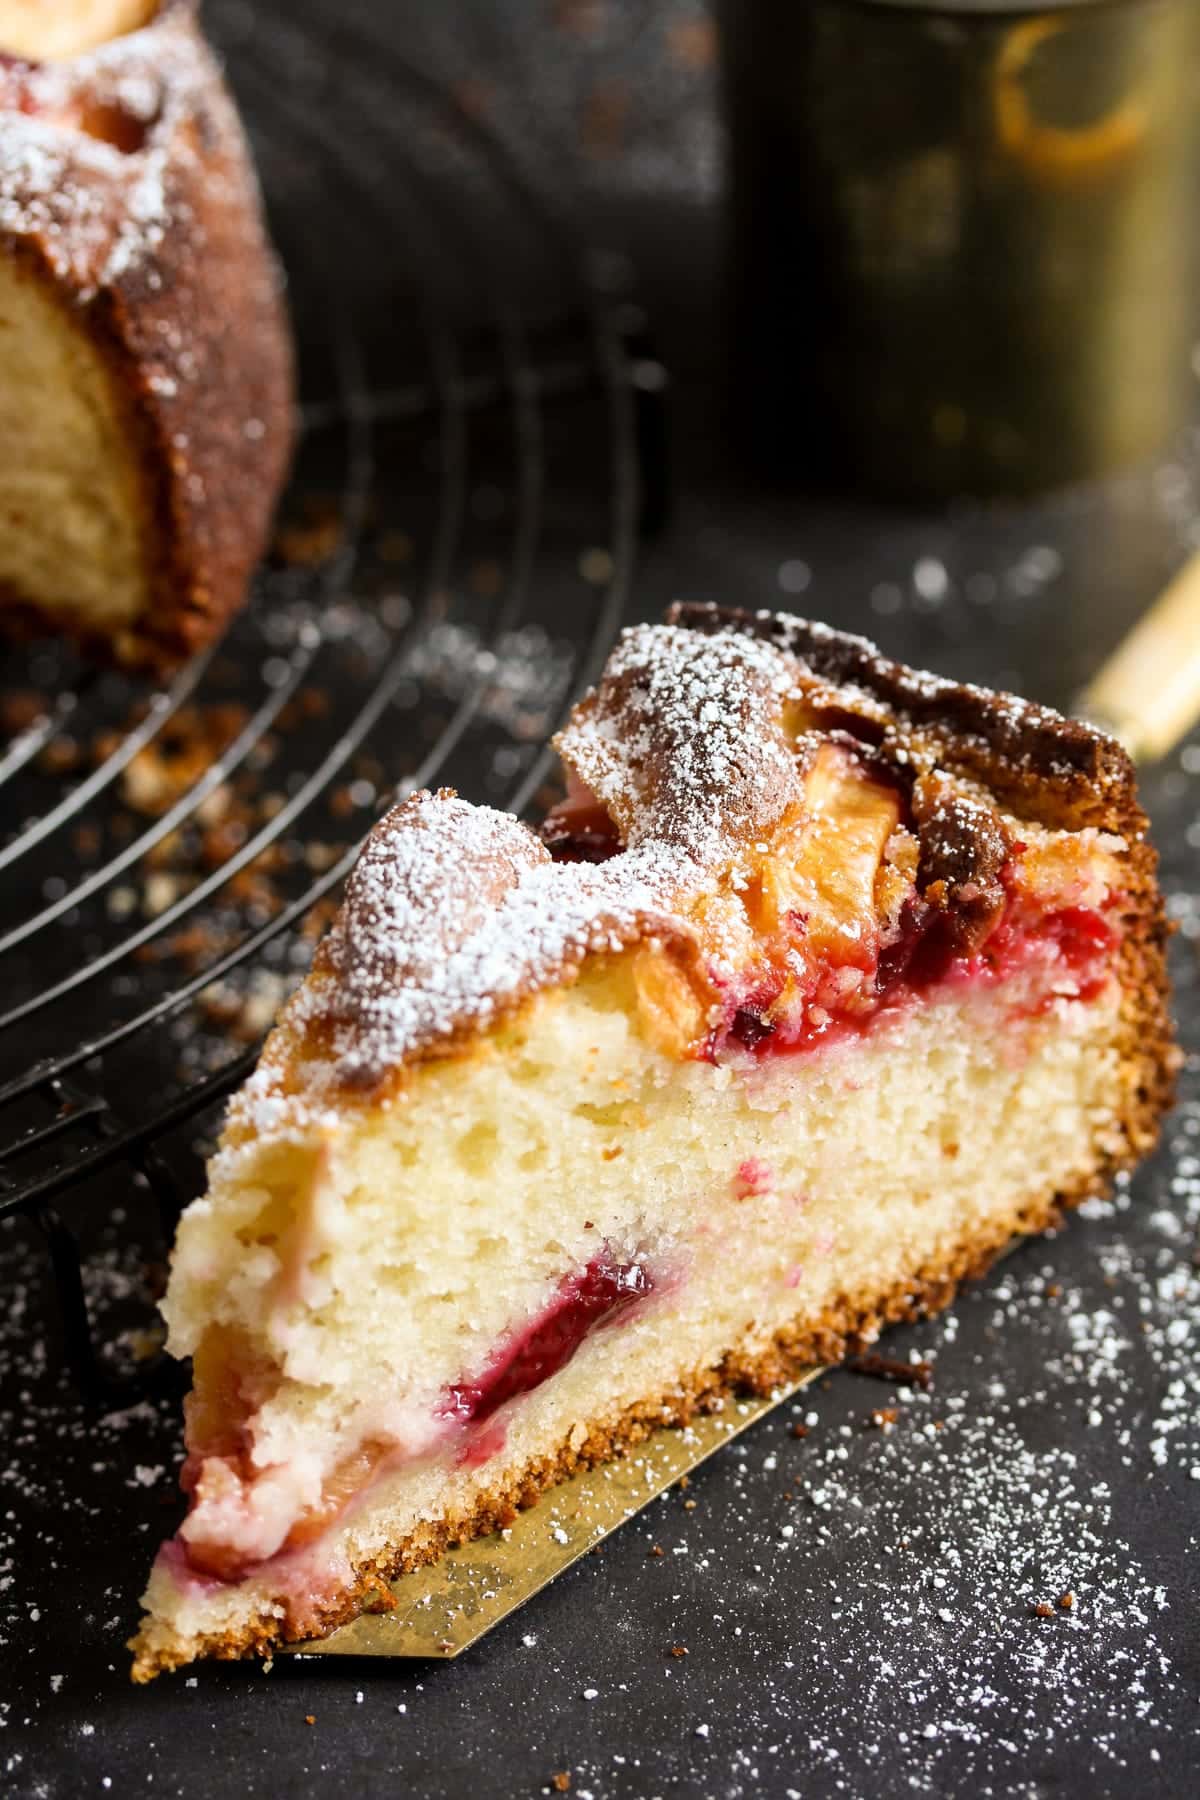 a slice of cake with pieces of plum showing.